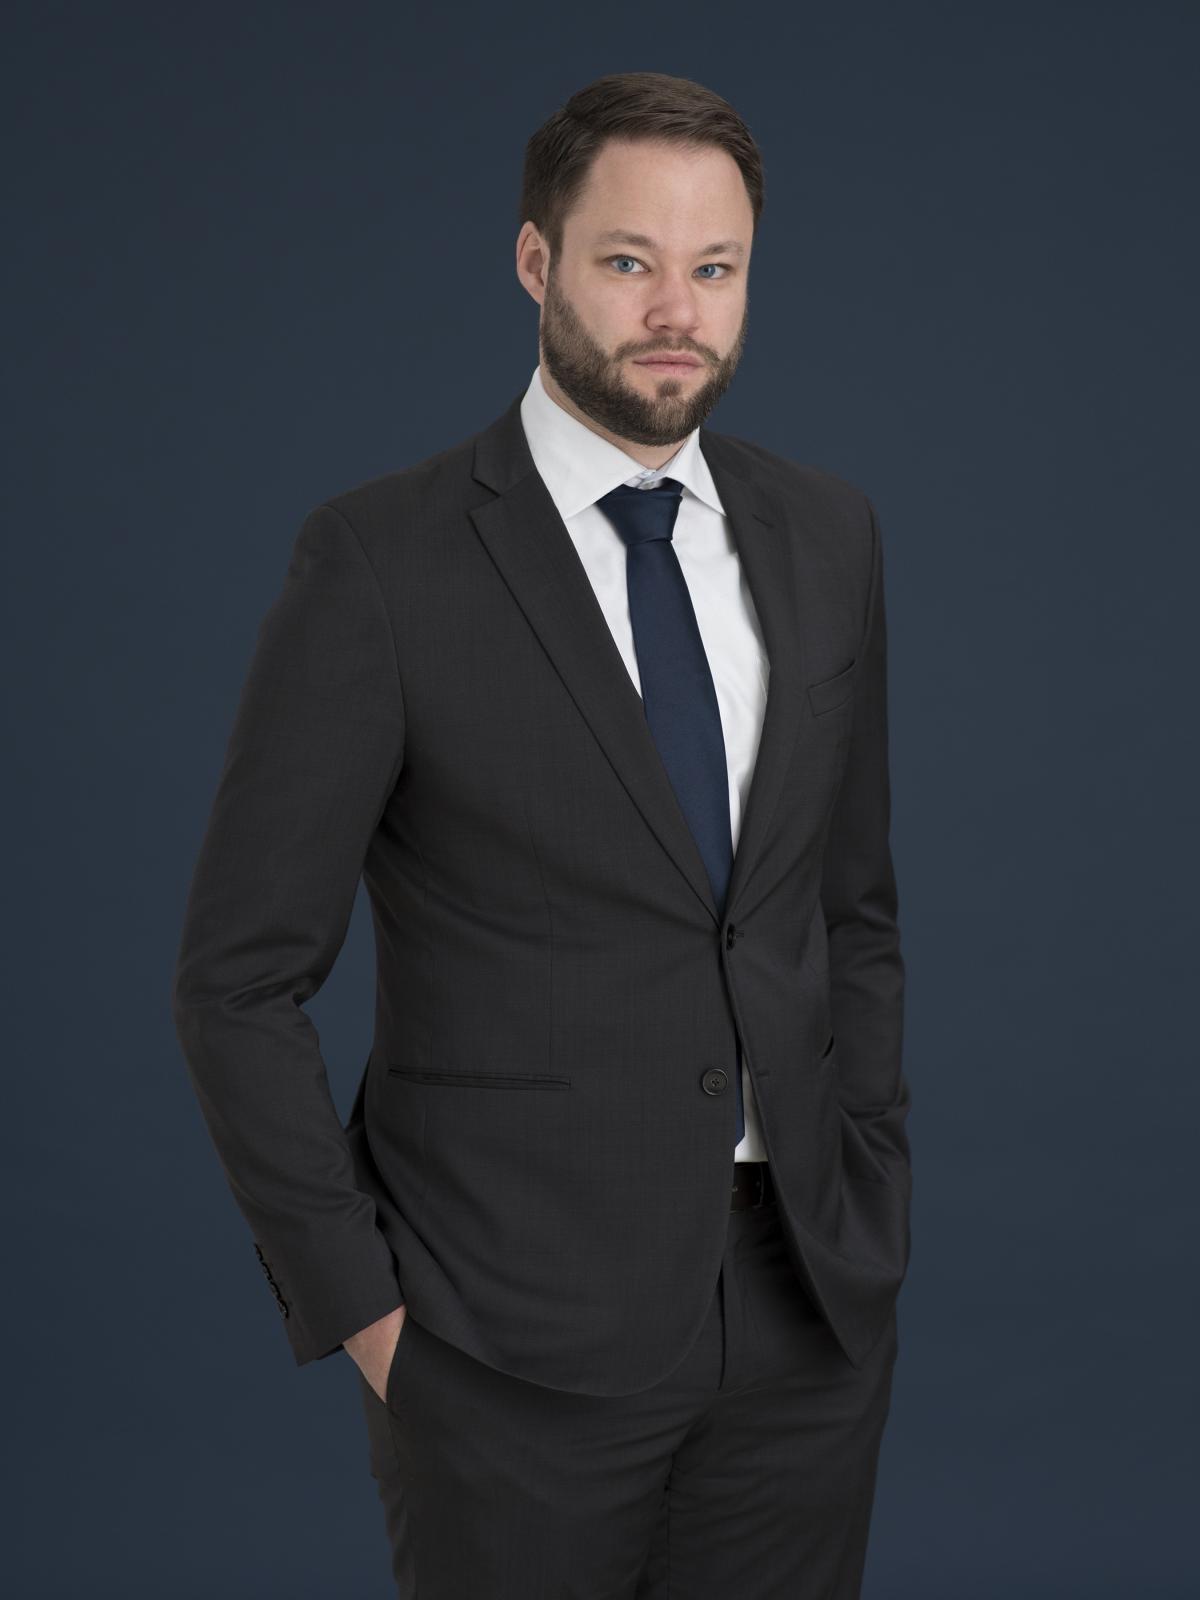 Jan Berchtold - Attorney at Law Zurich - Attorney-at-Law